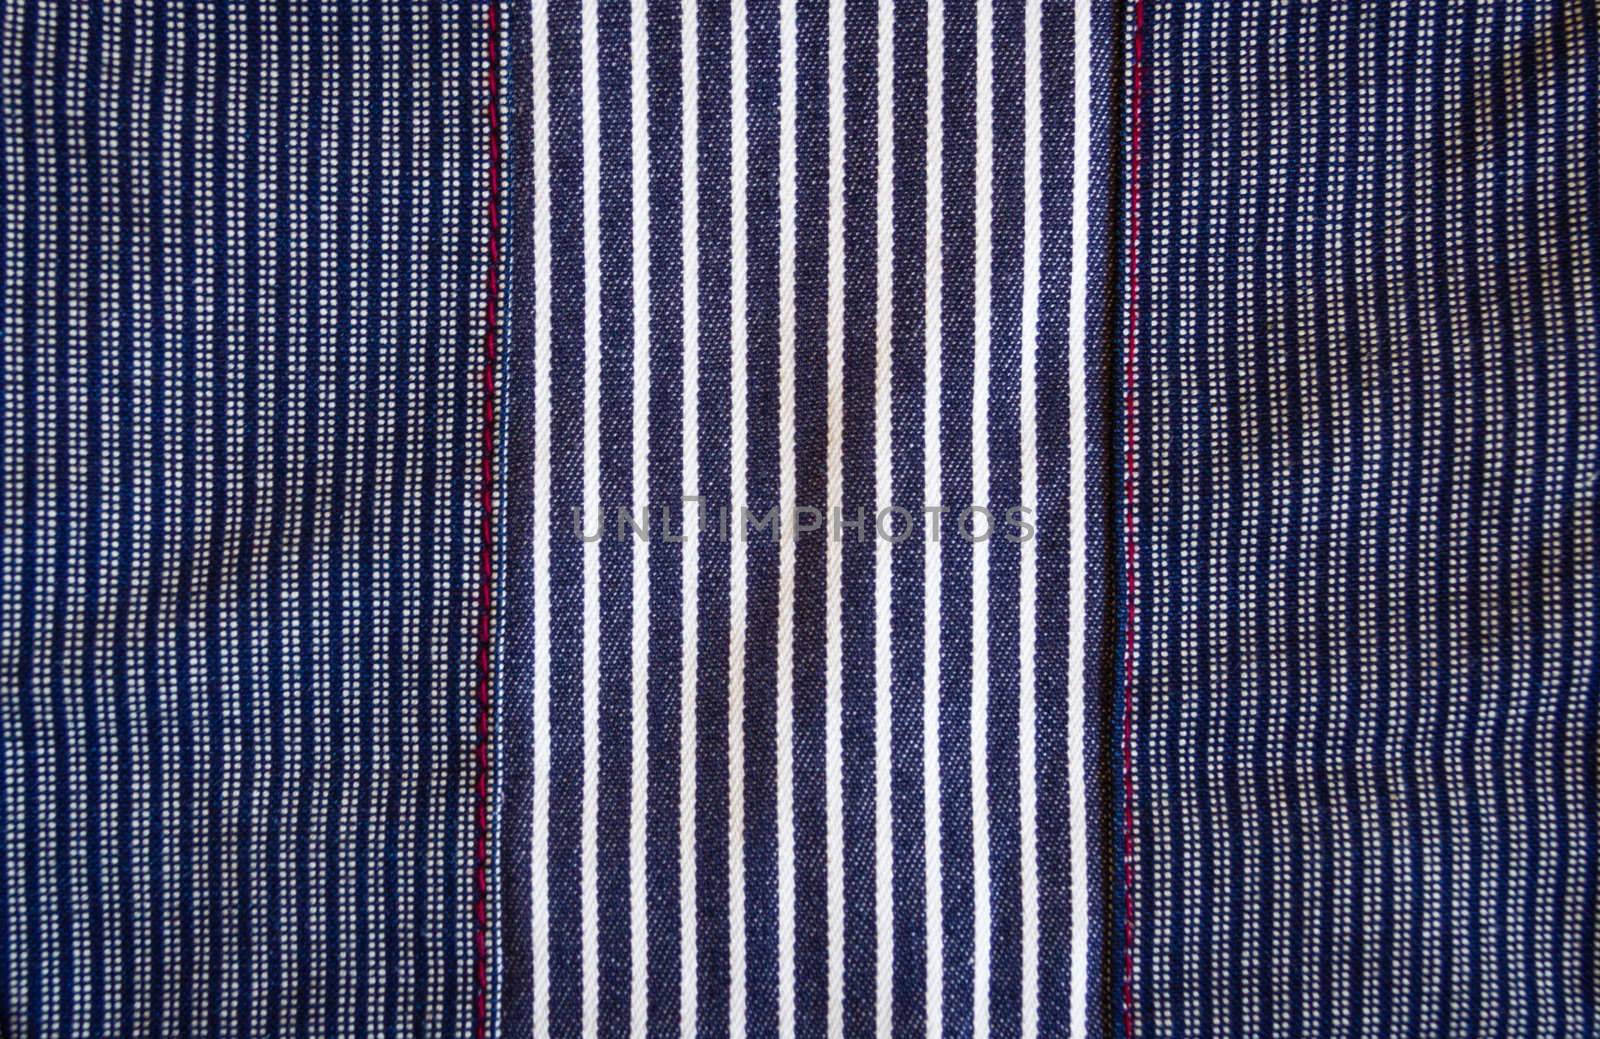 Fabric striped texture in dark blue, red and white tones